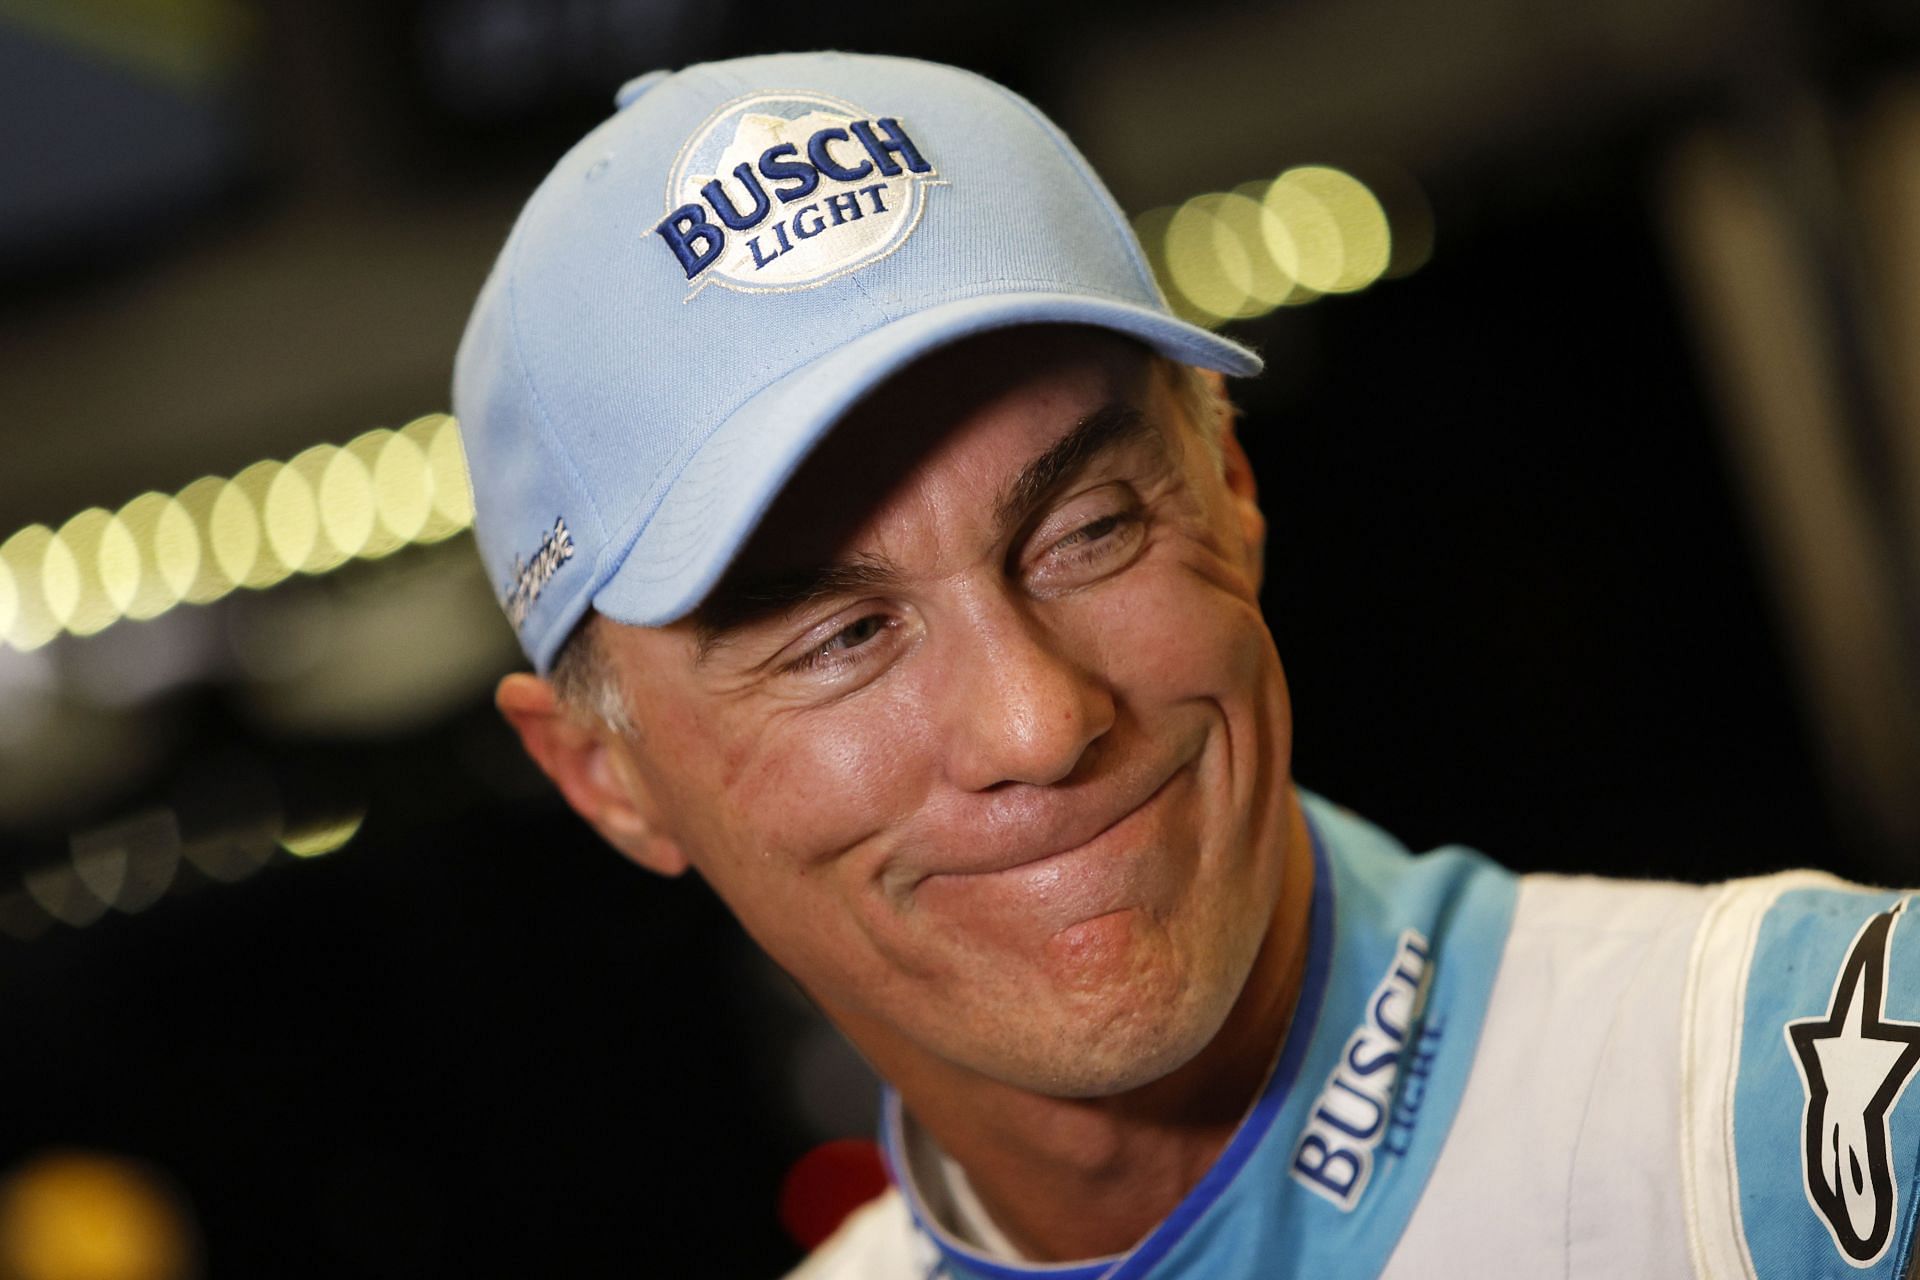 Kevin Harvick at the NASCAR Cup Series 64th Annual Daytona 500 practice